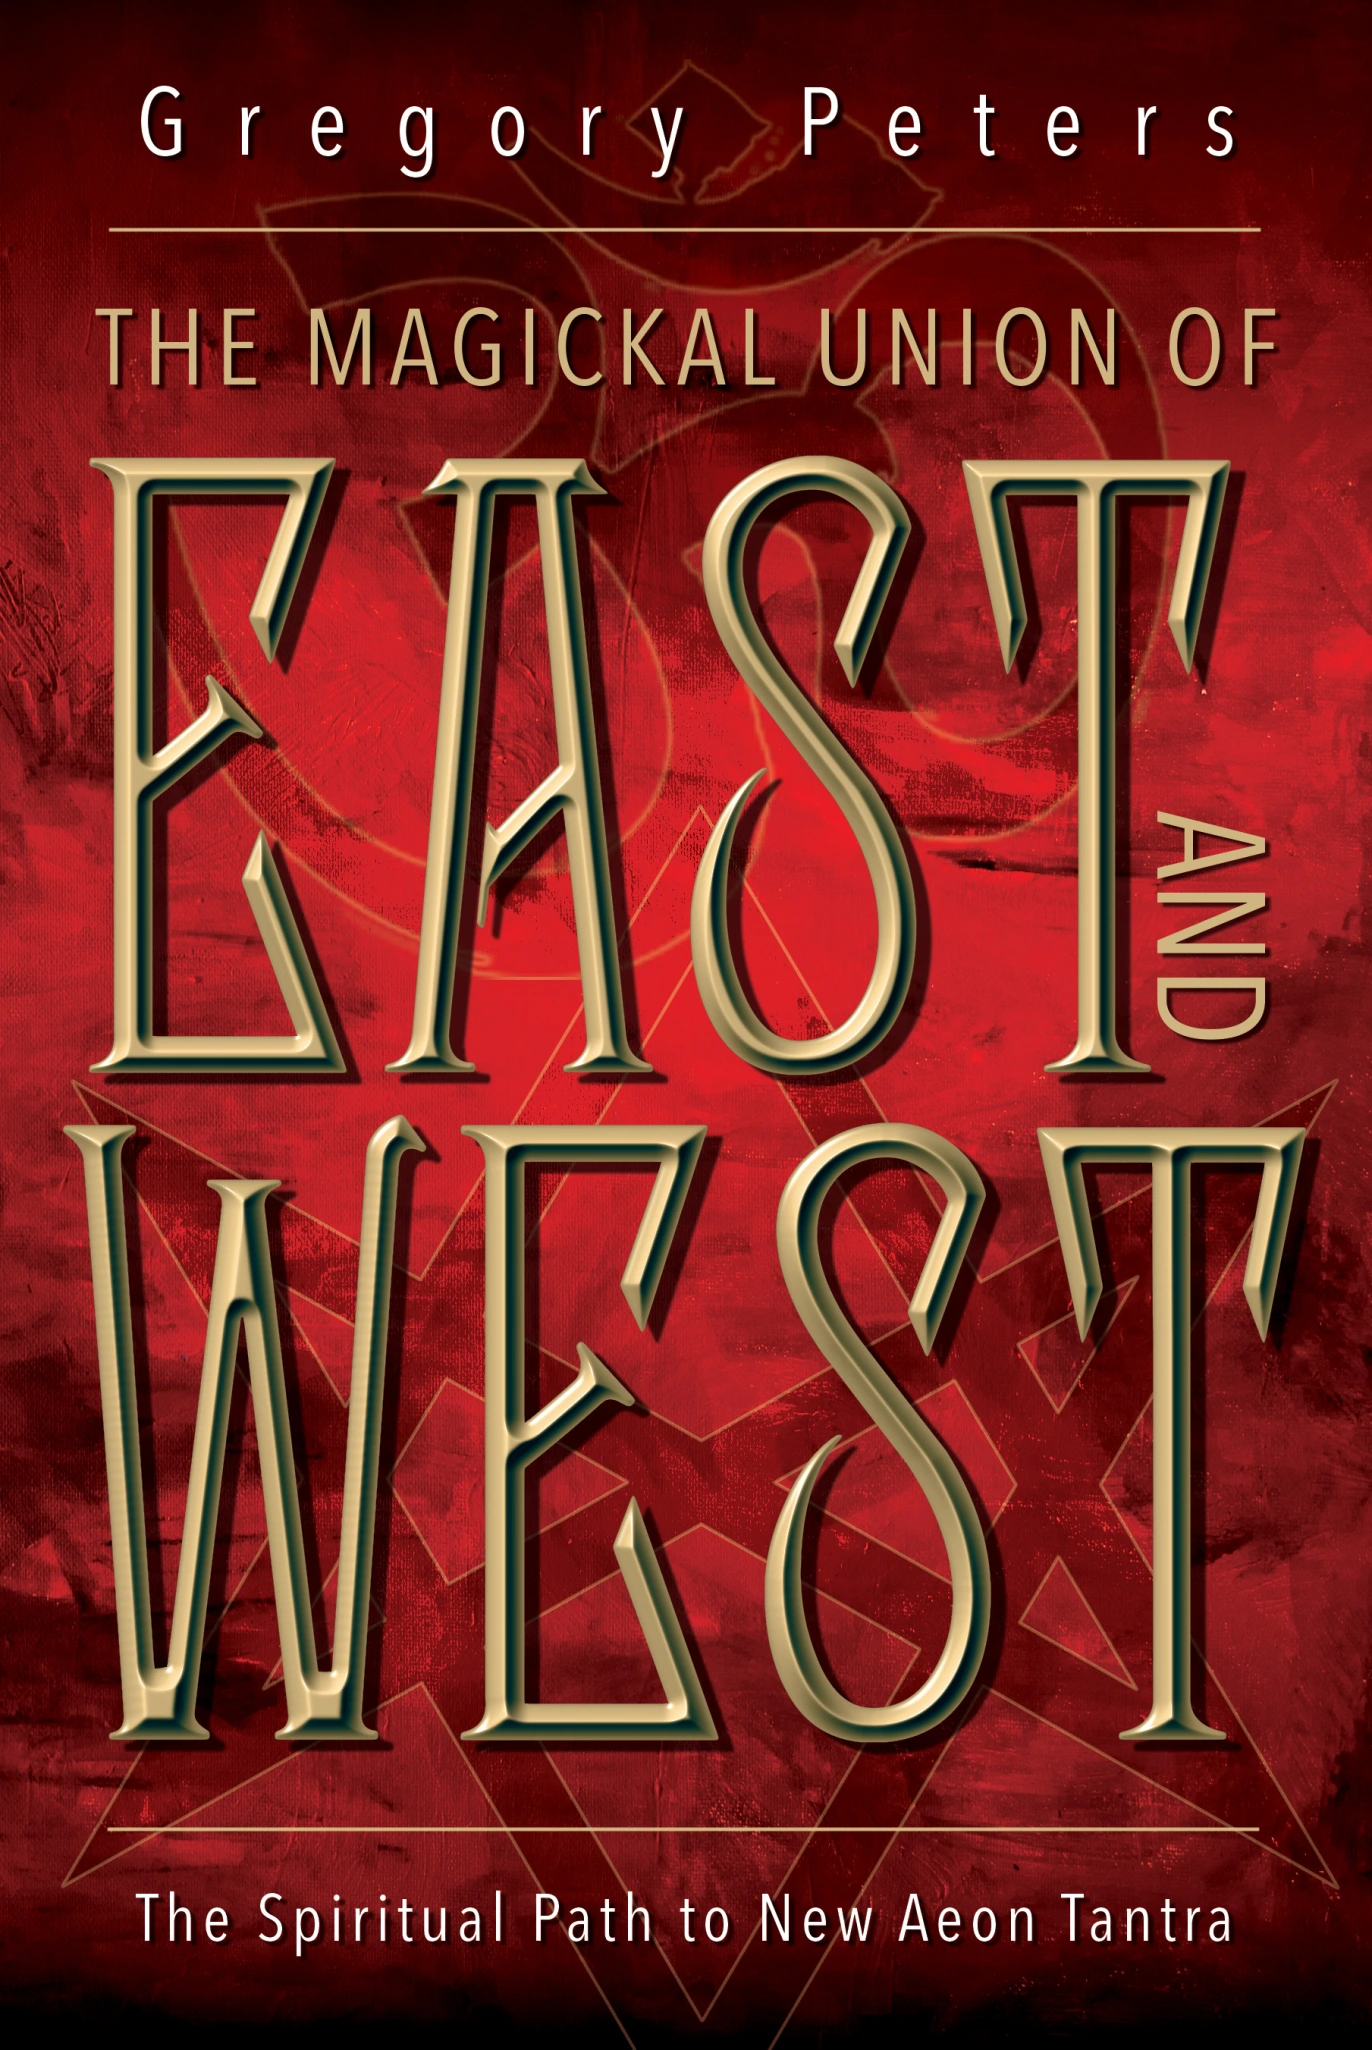 The Magickal Union of East & West